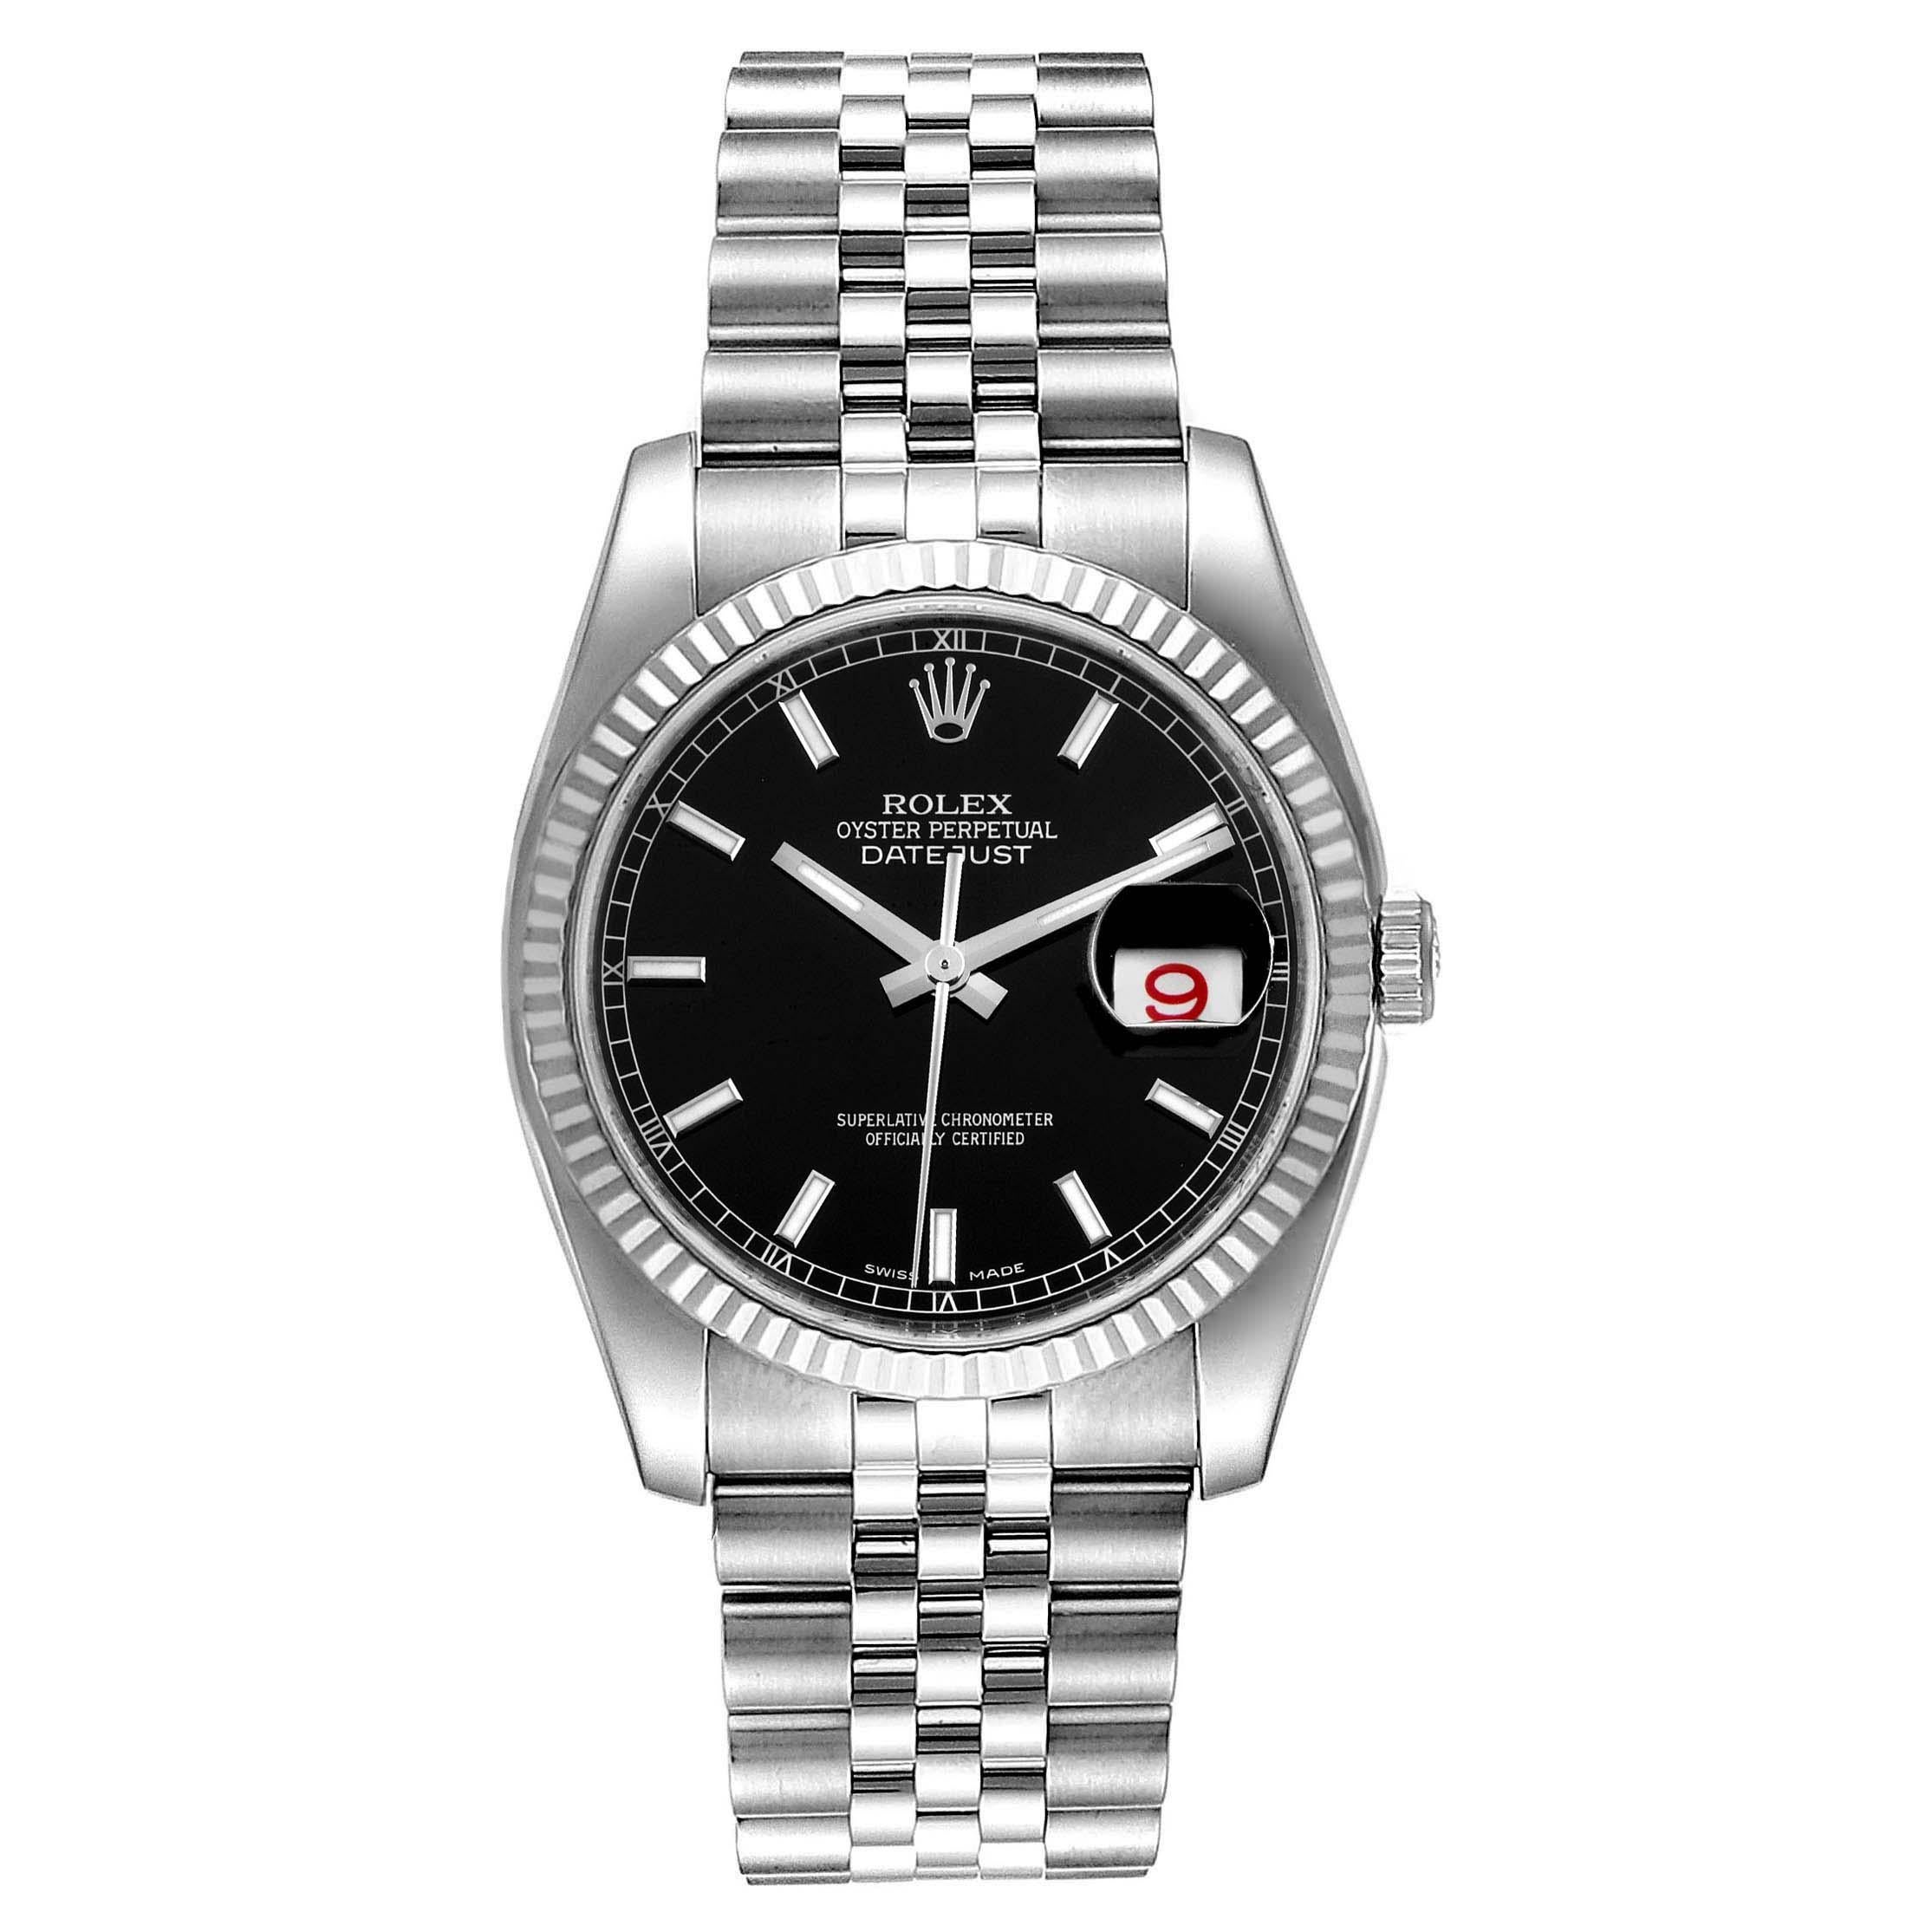 Rolex Datejust Steel White Gold Black Dial Mens Watch 116234 Box Card. Officially certified chronometer self-winding movement. Stainless steel case 36.0 mm in diameter. Rolex logo on a crown. 18K white gold fluted bezel. Scratch resistant sapphire